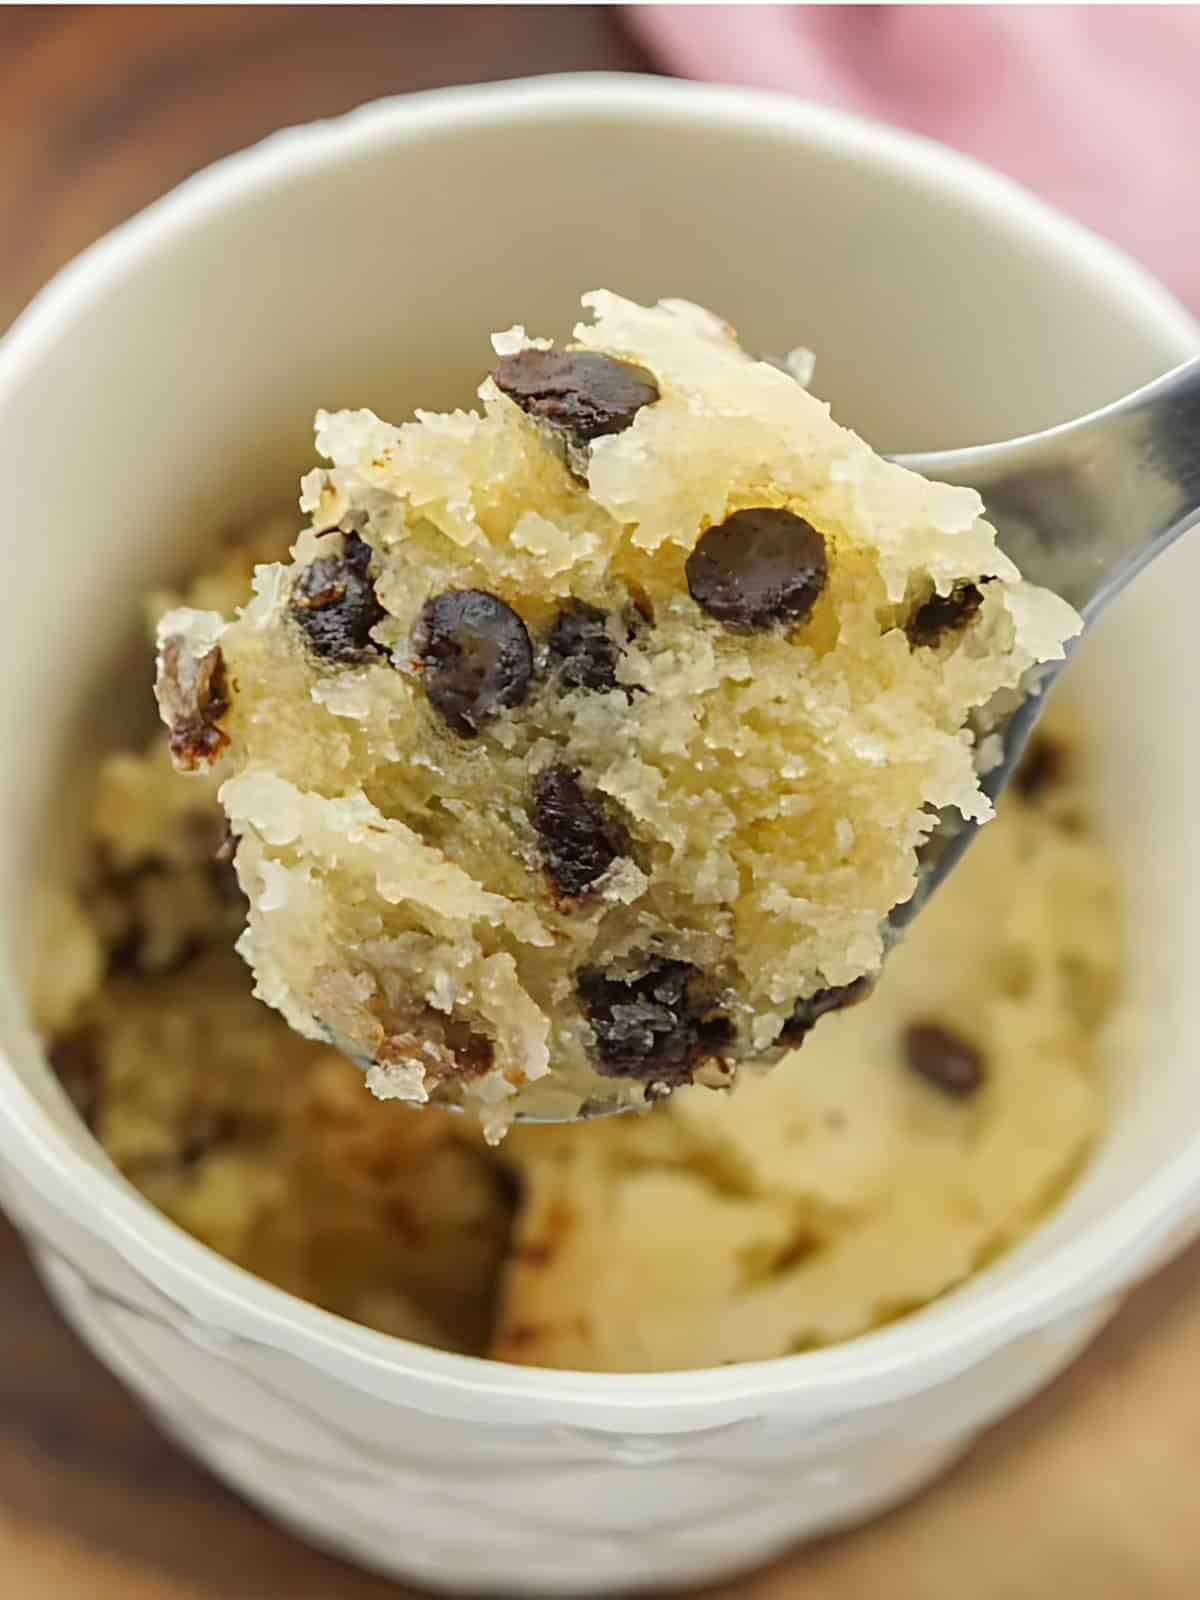 A serving of chocolate chip mug cake on a spoon topped with bits of chocolate chips.